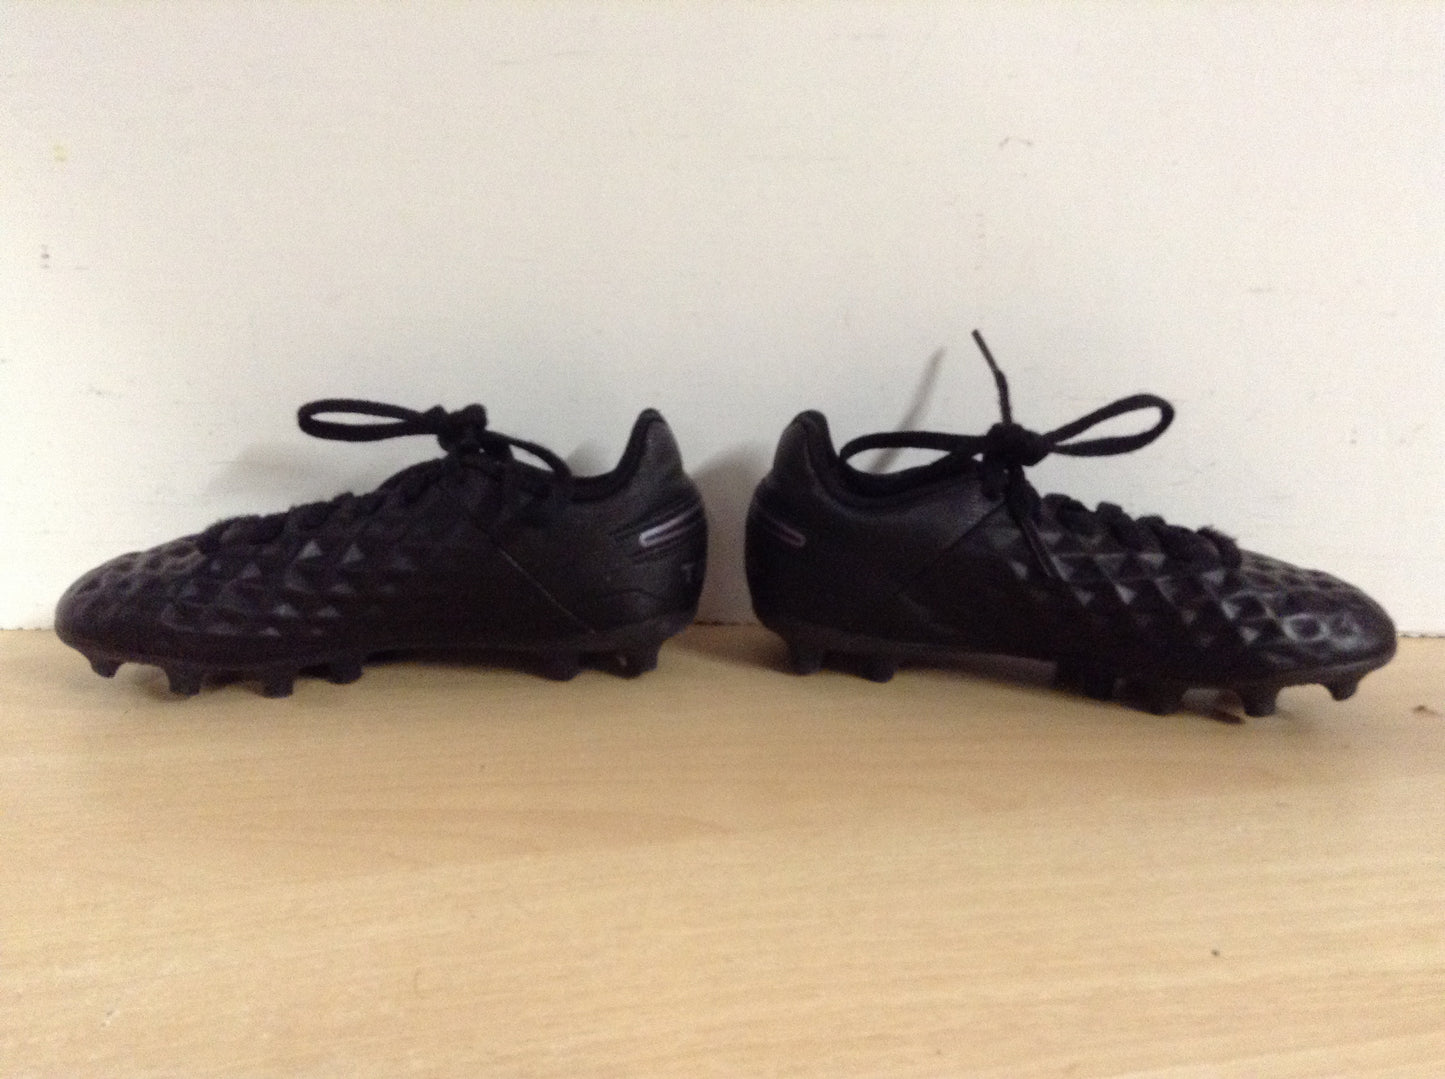 Soccer Shoes Cleats Child Size 12 Nike Tiempo Black As New